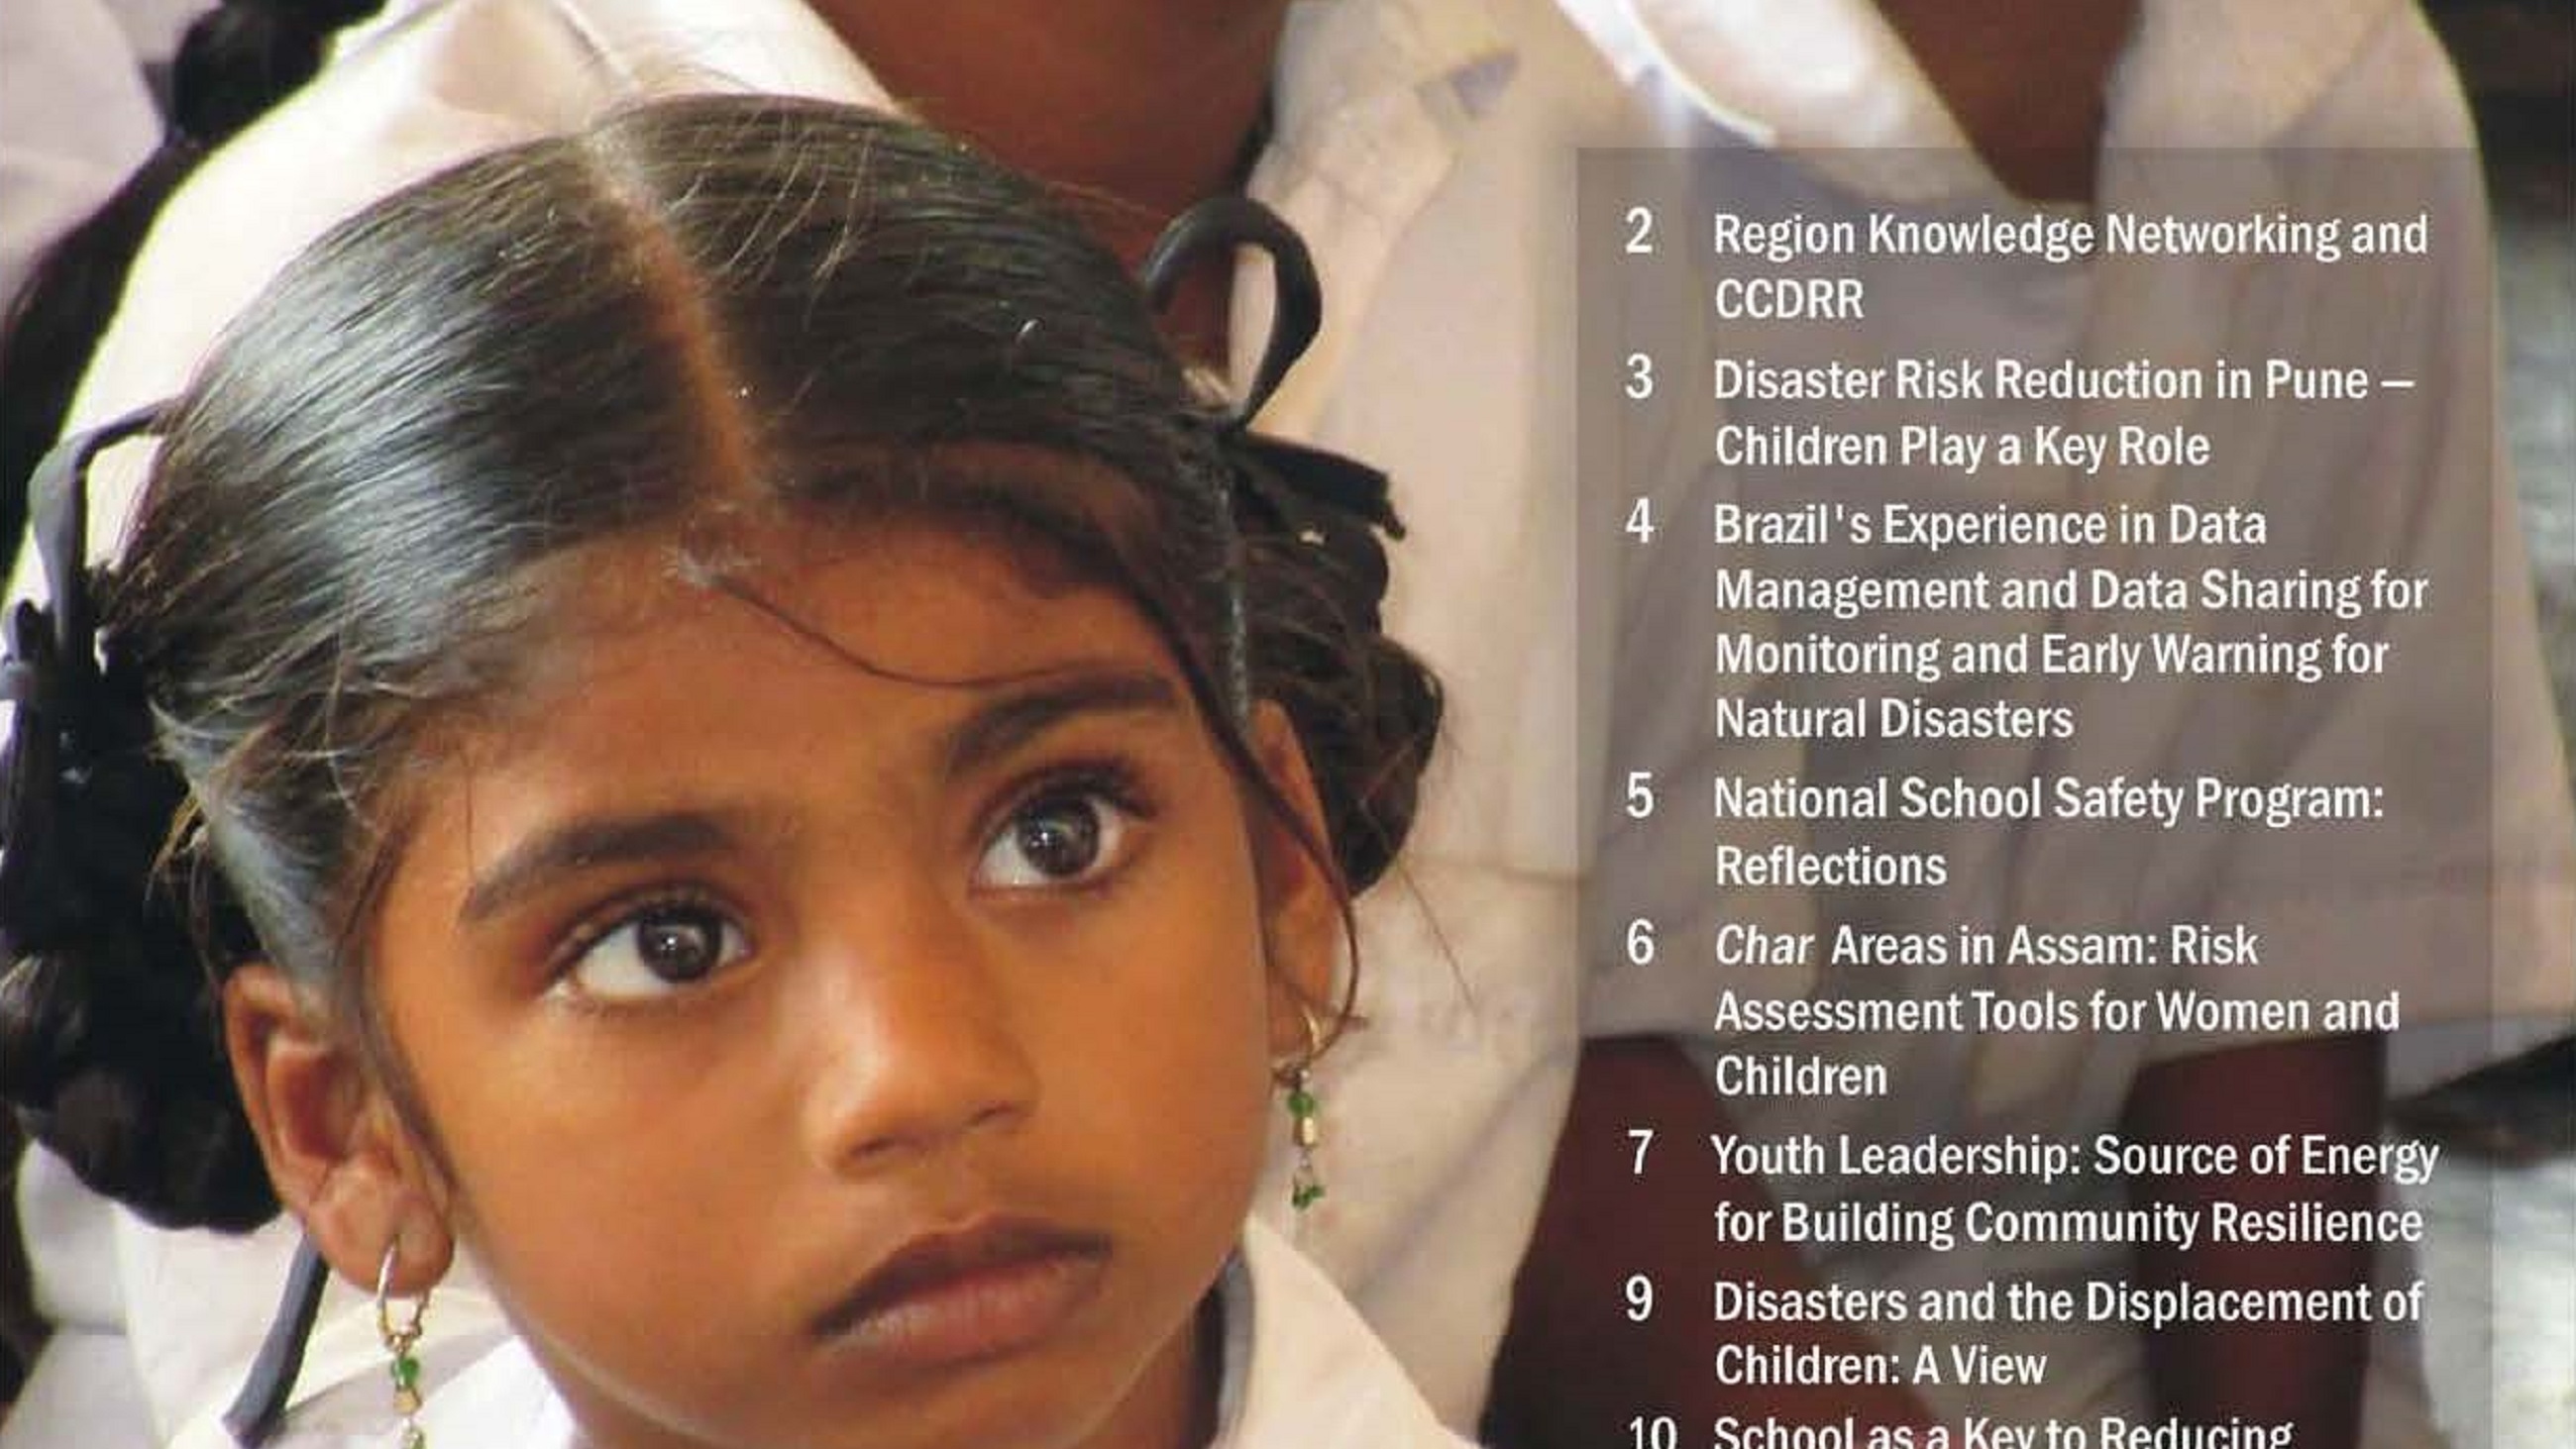 southasisadisasters.net cover page